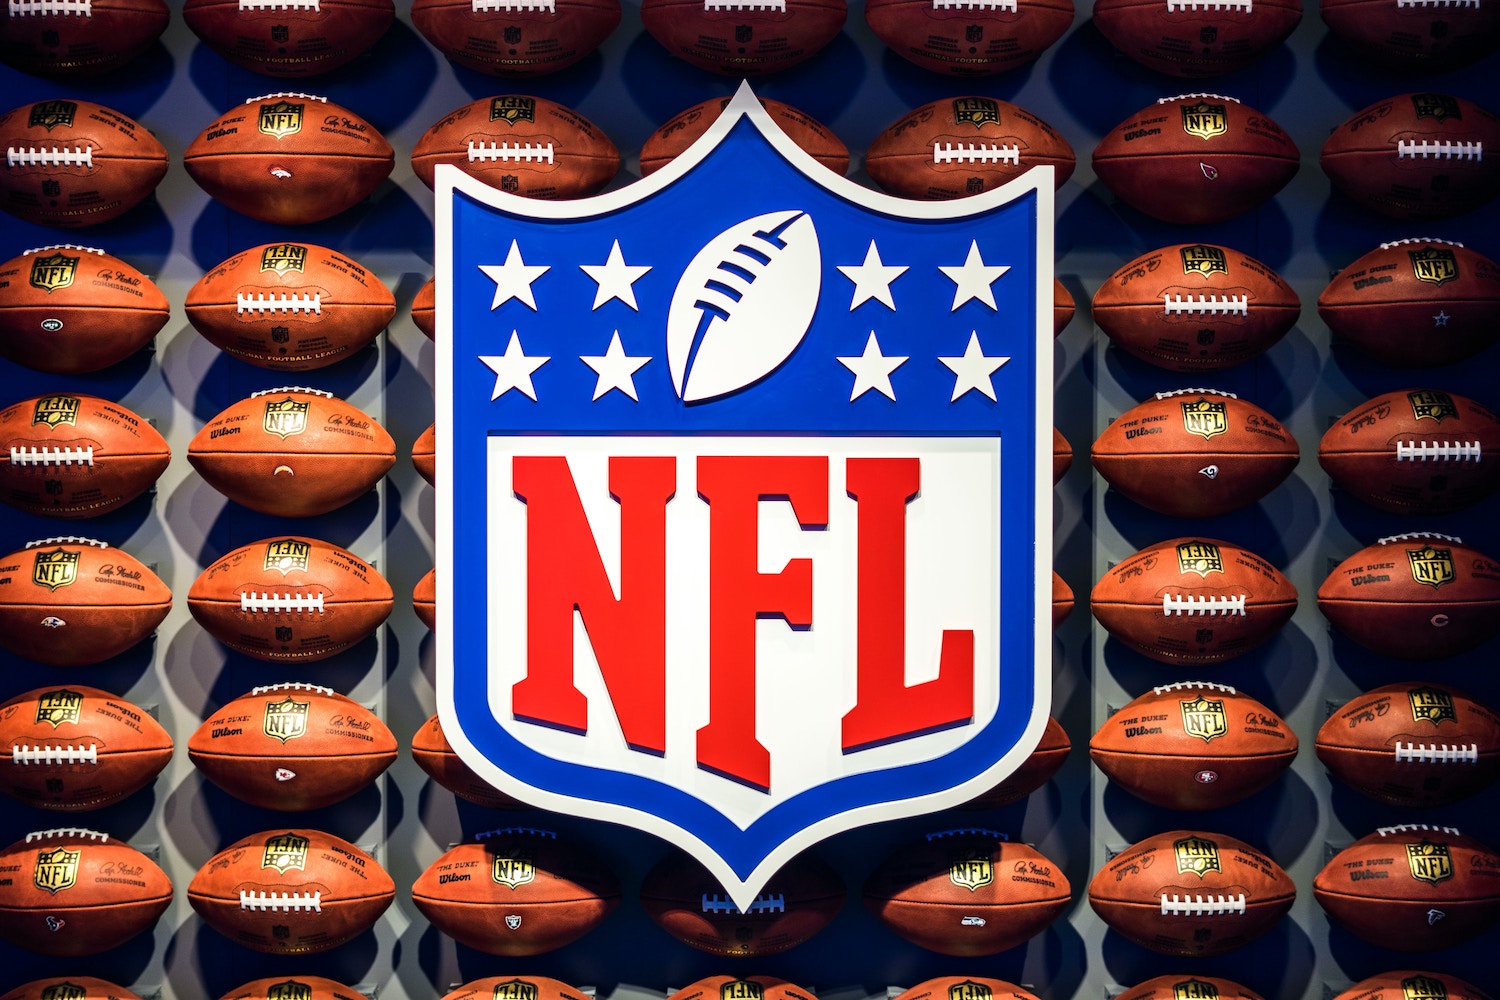 NFLs New YouTube Sunday Ticket Has a Presale $100 Discount